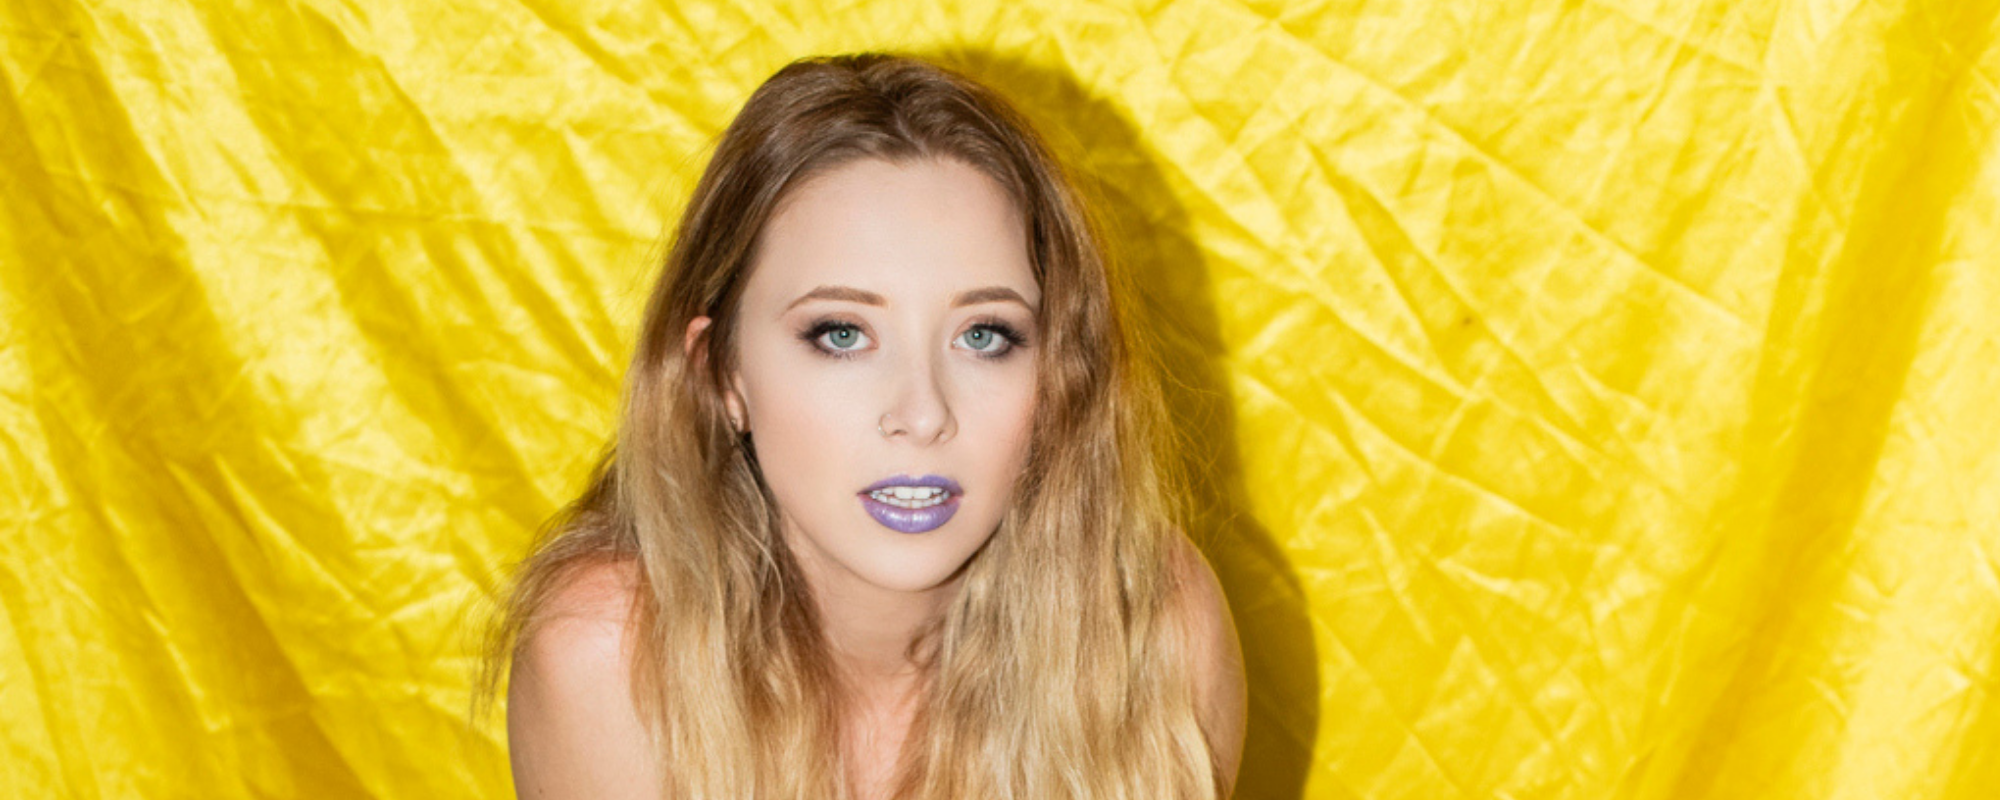 Kalie Shorr Shares Story Behind Viral Song, “Amy,” on ‘Pitch List’